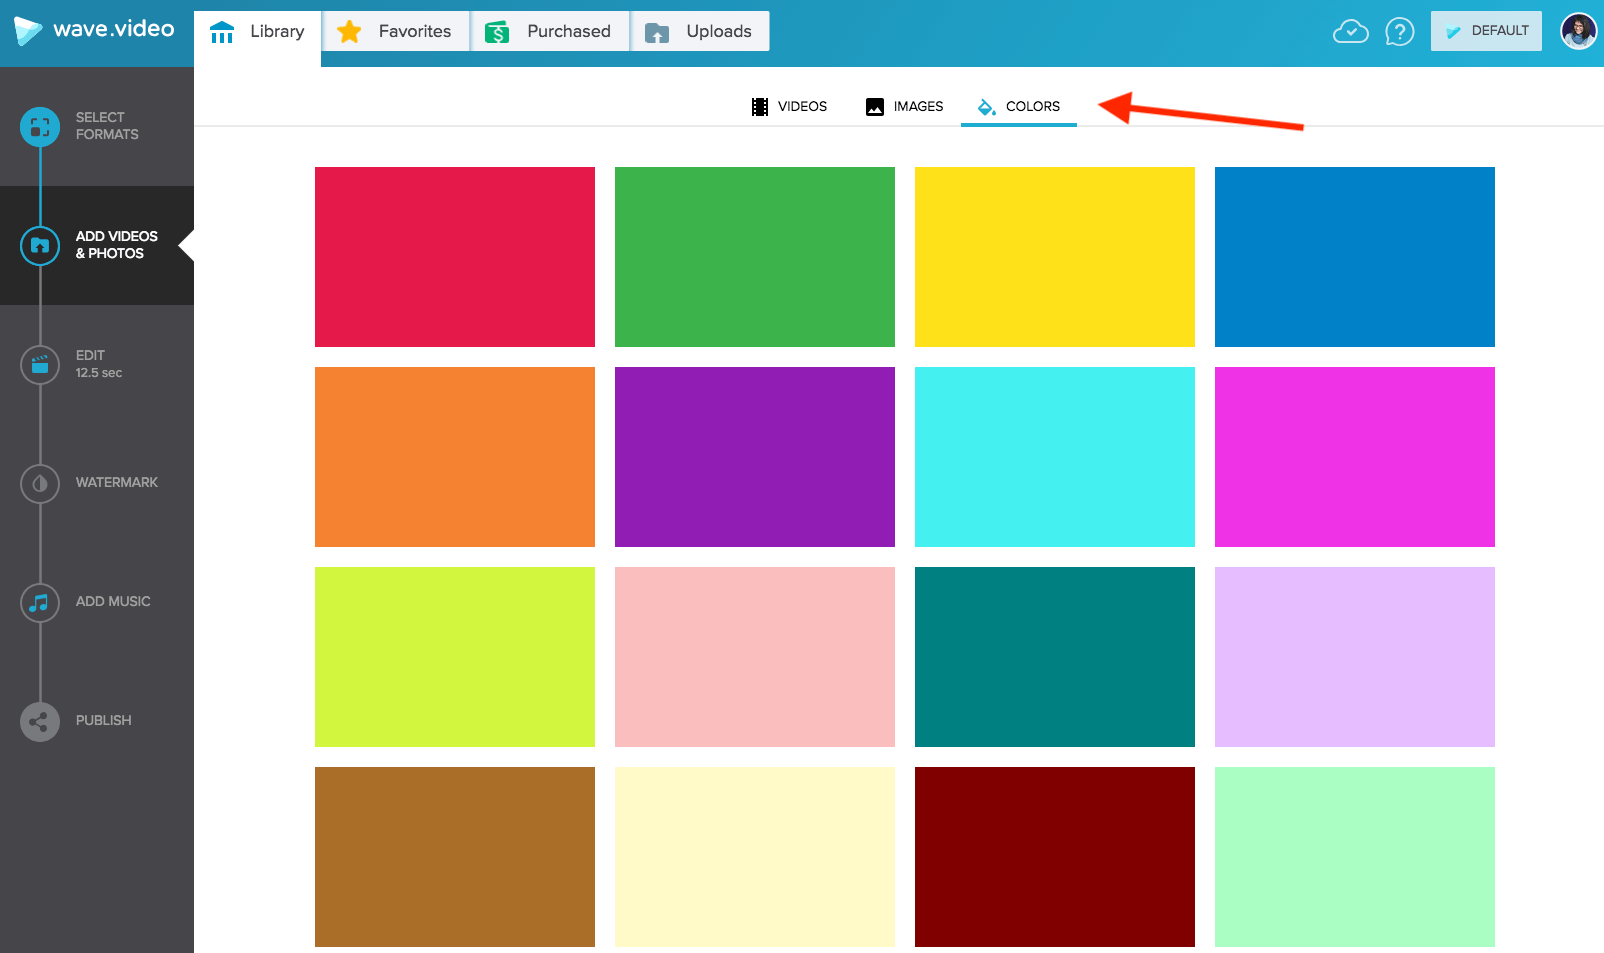 Colored backgrounds in Wave.video